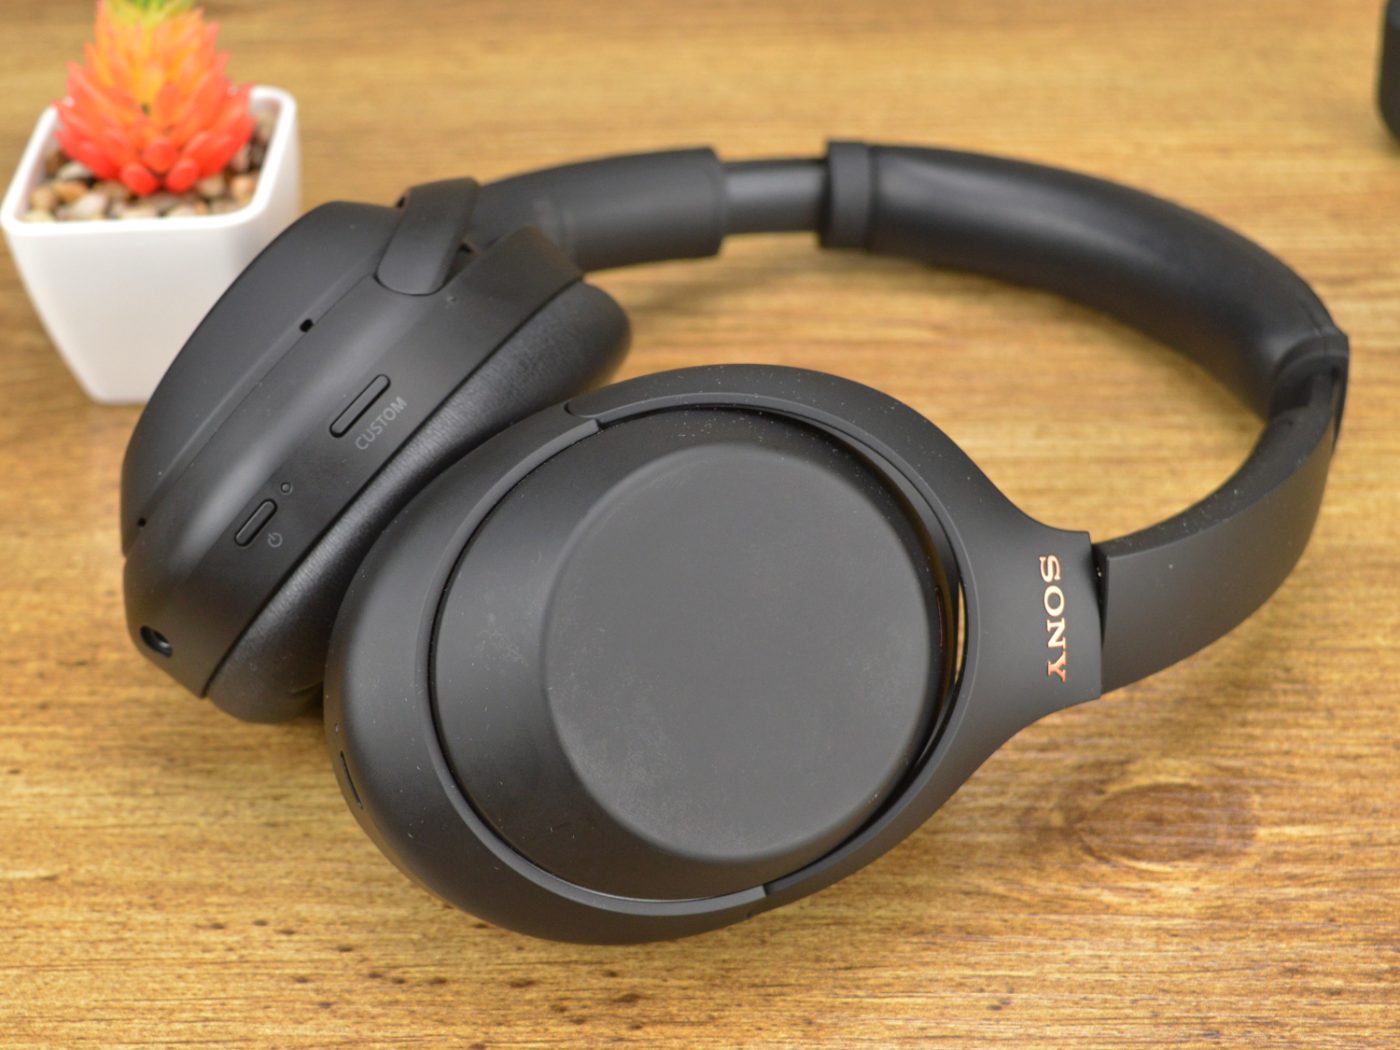 Sony WH-1000XM4 review: A nearly flawless noise-canceling